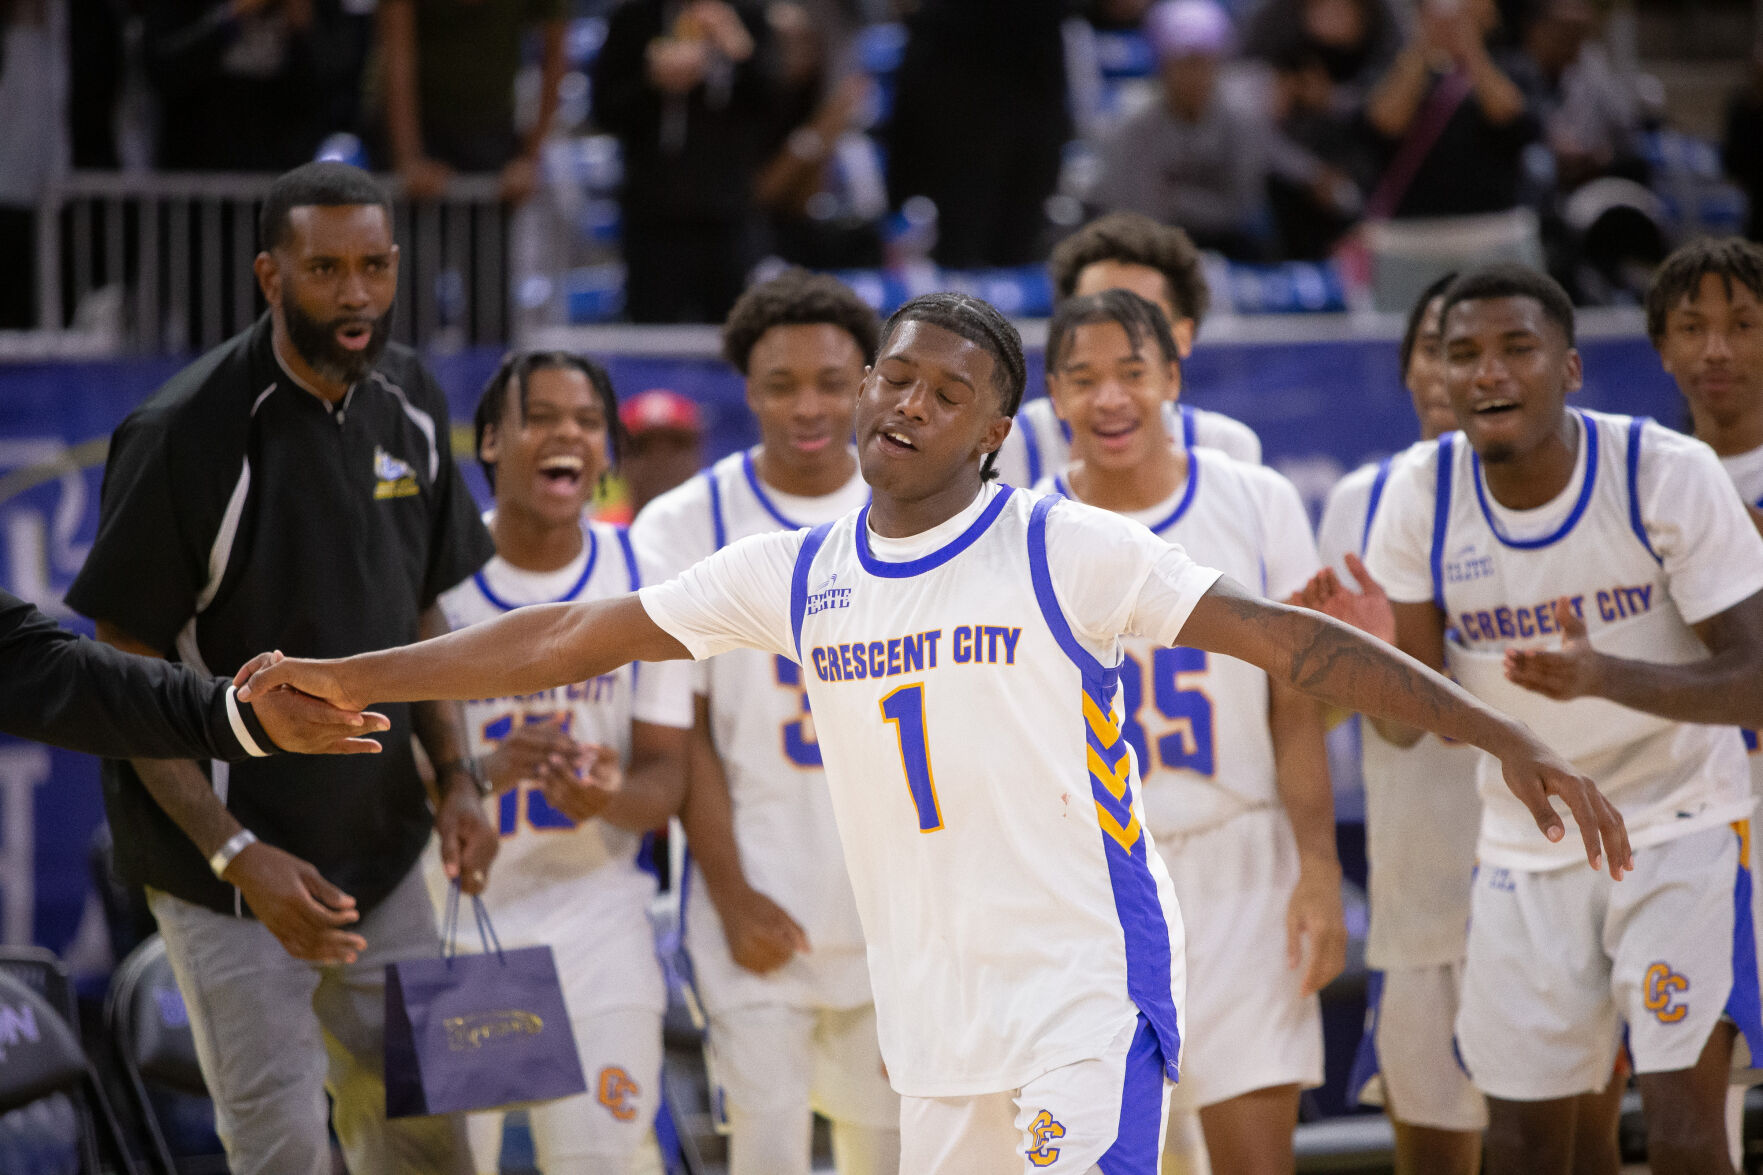 Crescent City Secures Boys State Title after Epic Second Half Showdown